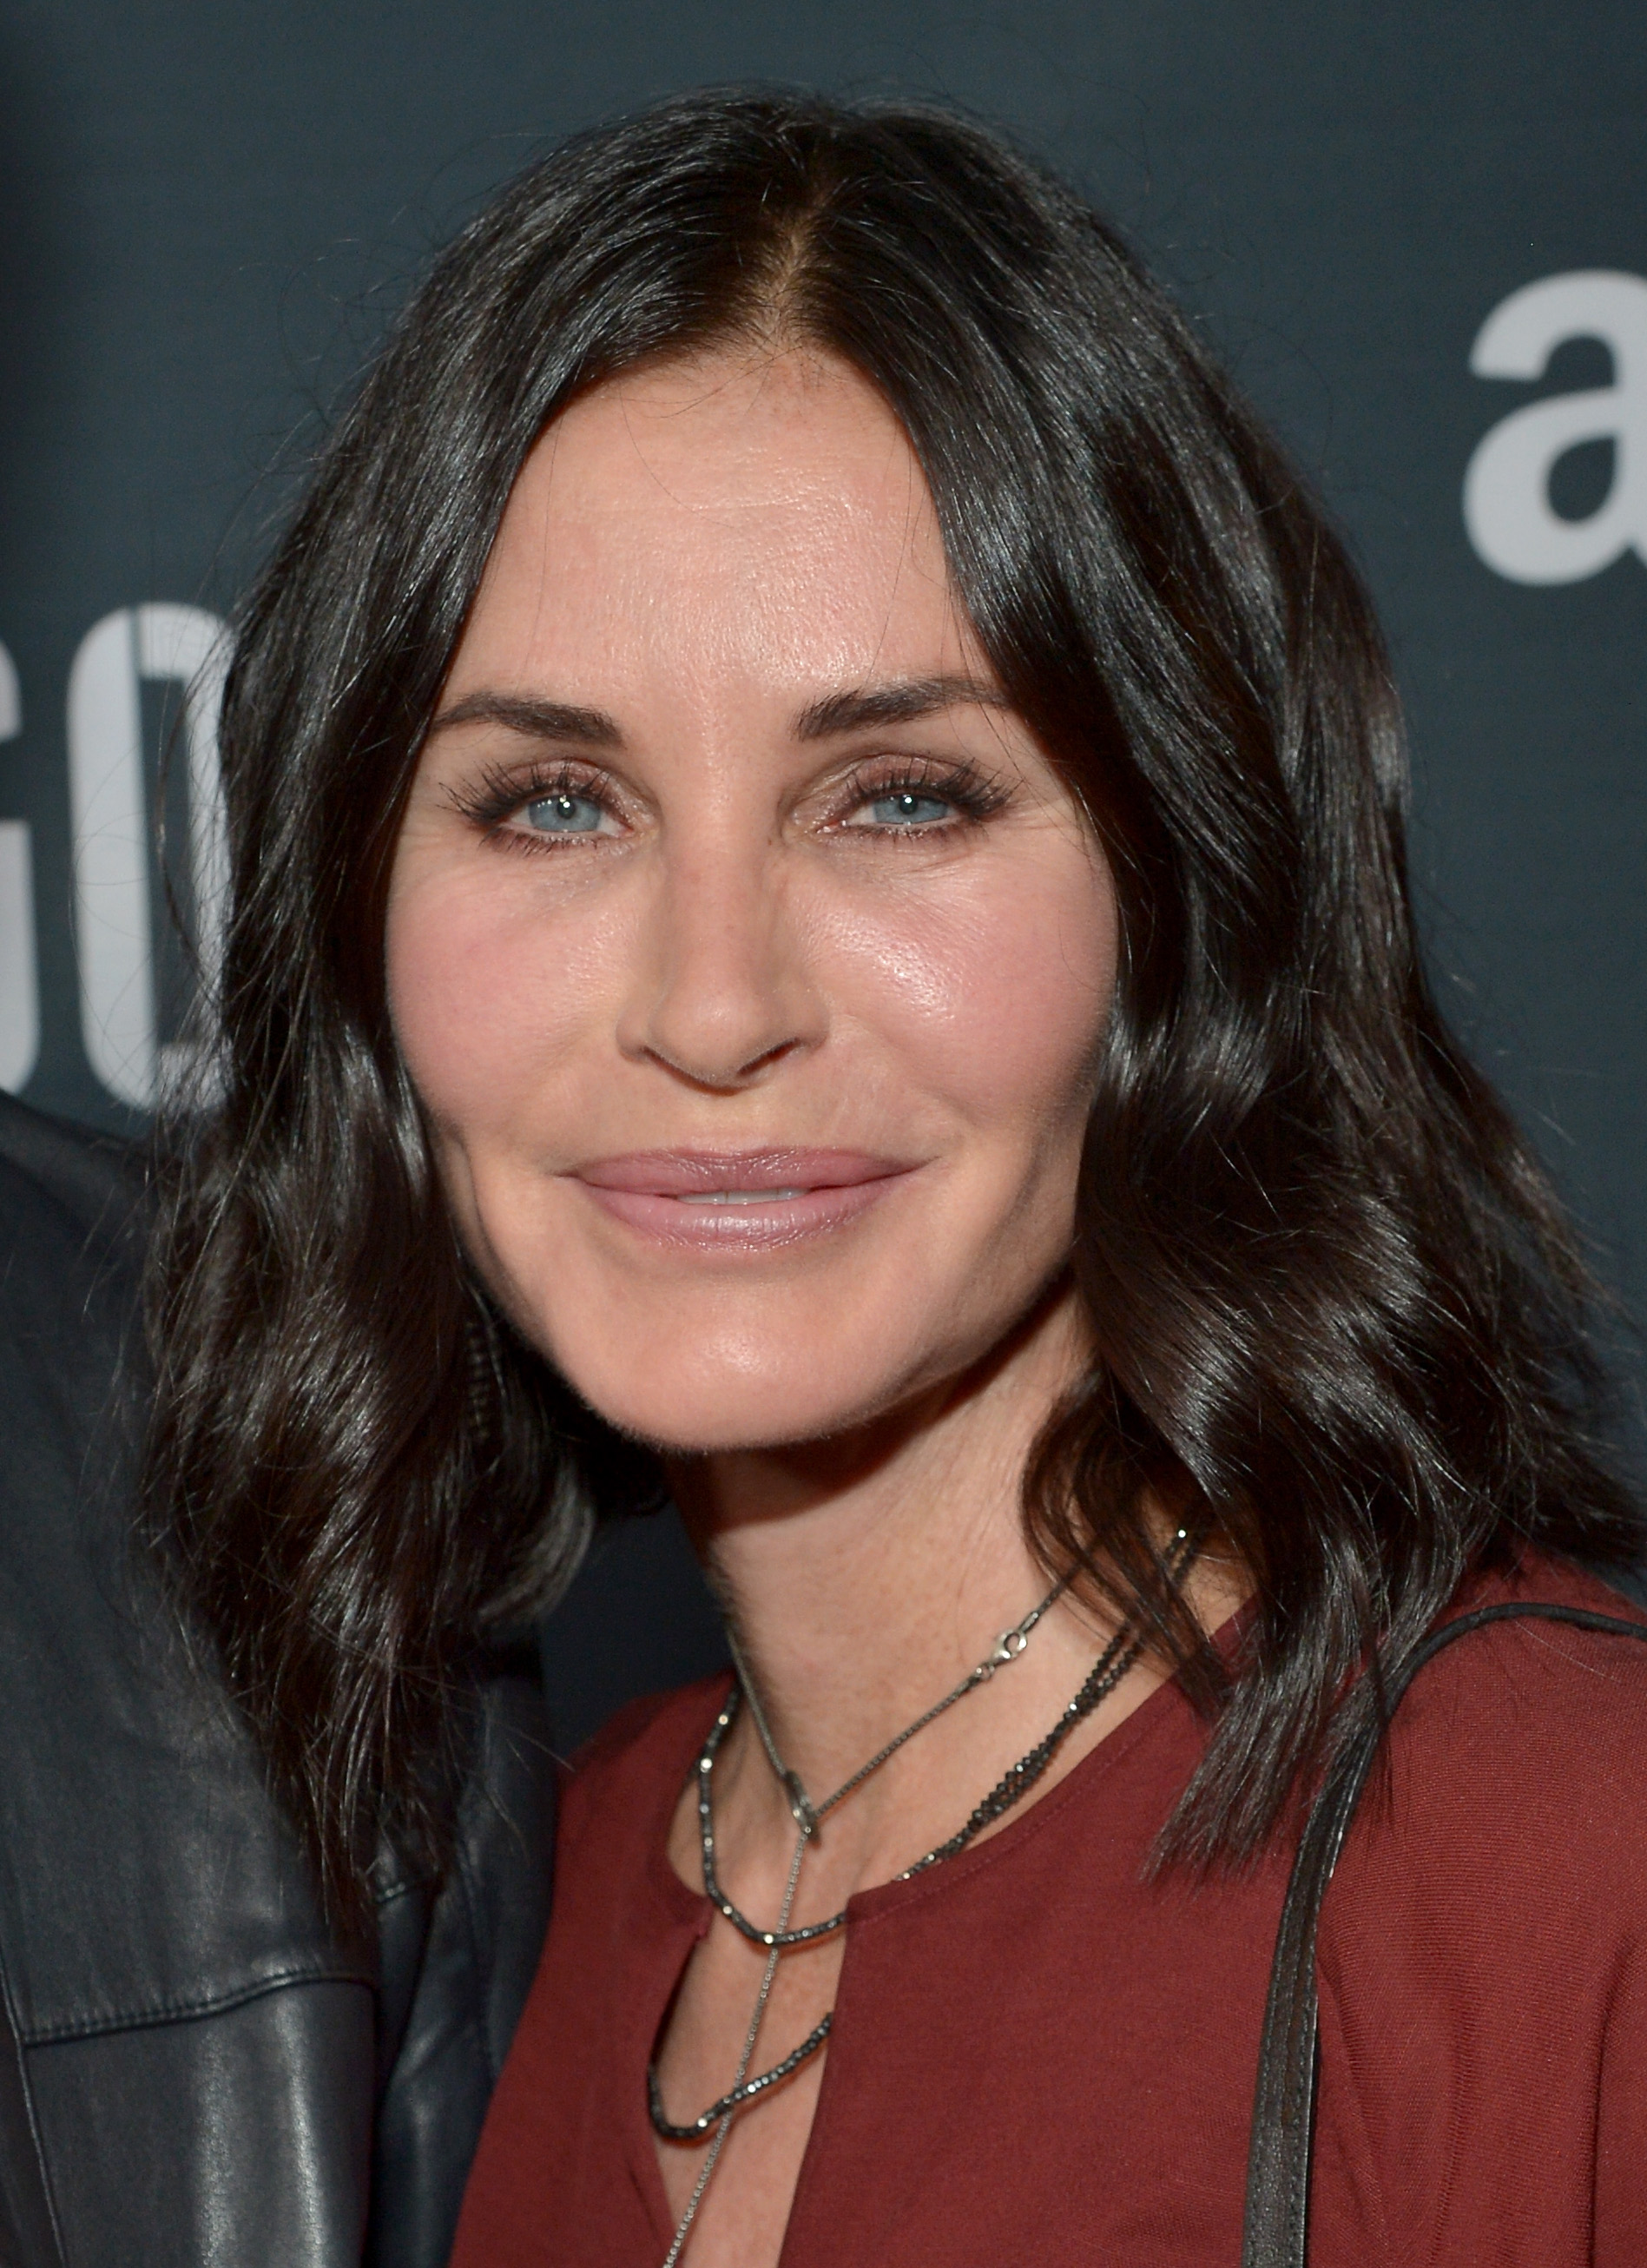 Courteney Cox attends the Amazon premiere screening for original drama series "Hand Of God" at The Theatre at Ace Hotel in Los Angeles, California on August 19, 2015. | Source: Getty Images